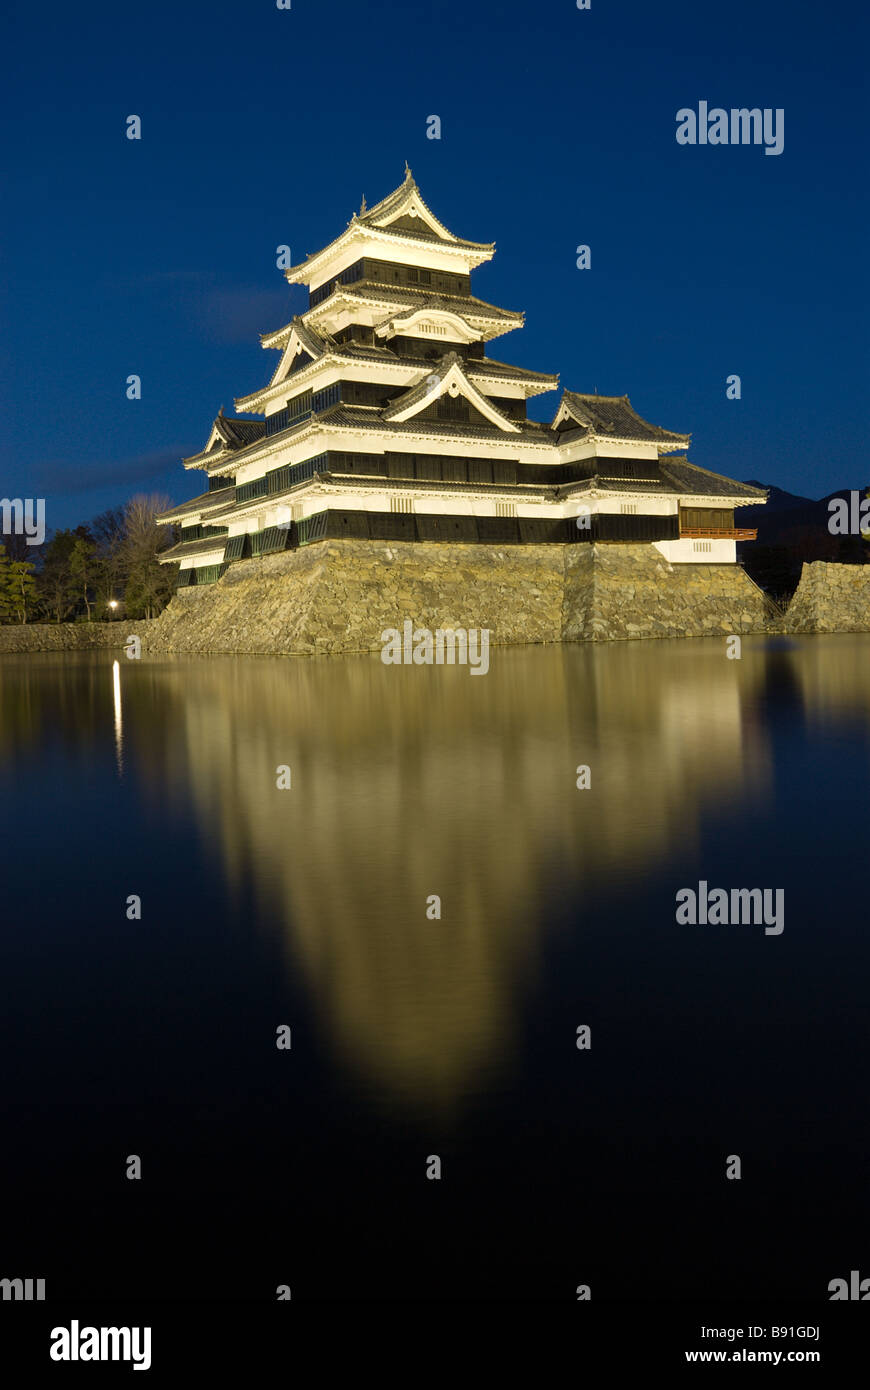 Matsumoto castle by night against a blue sky. Stock Photo